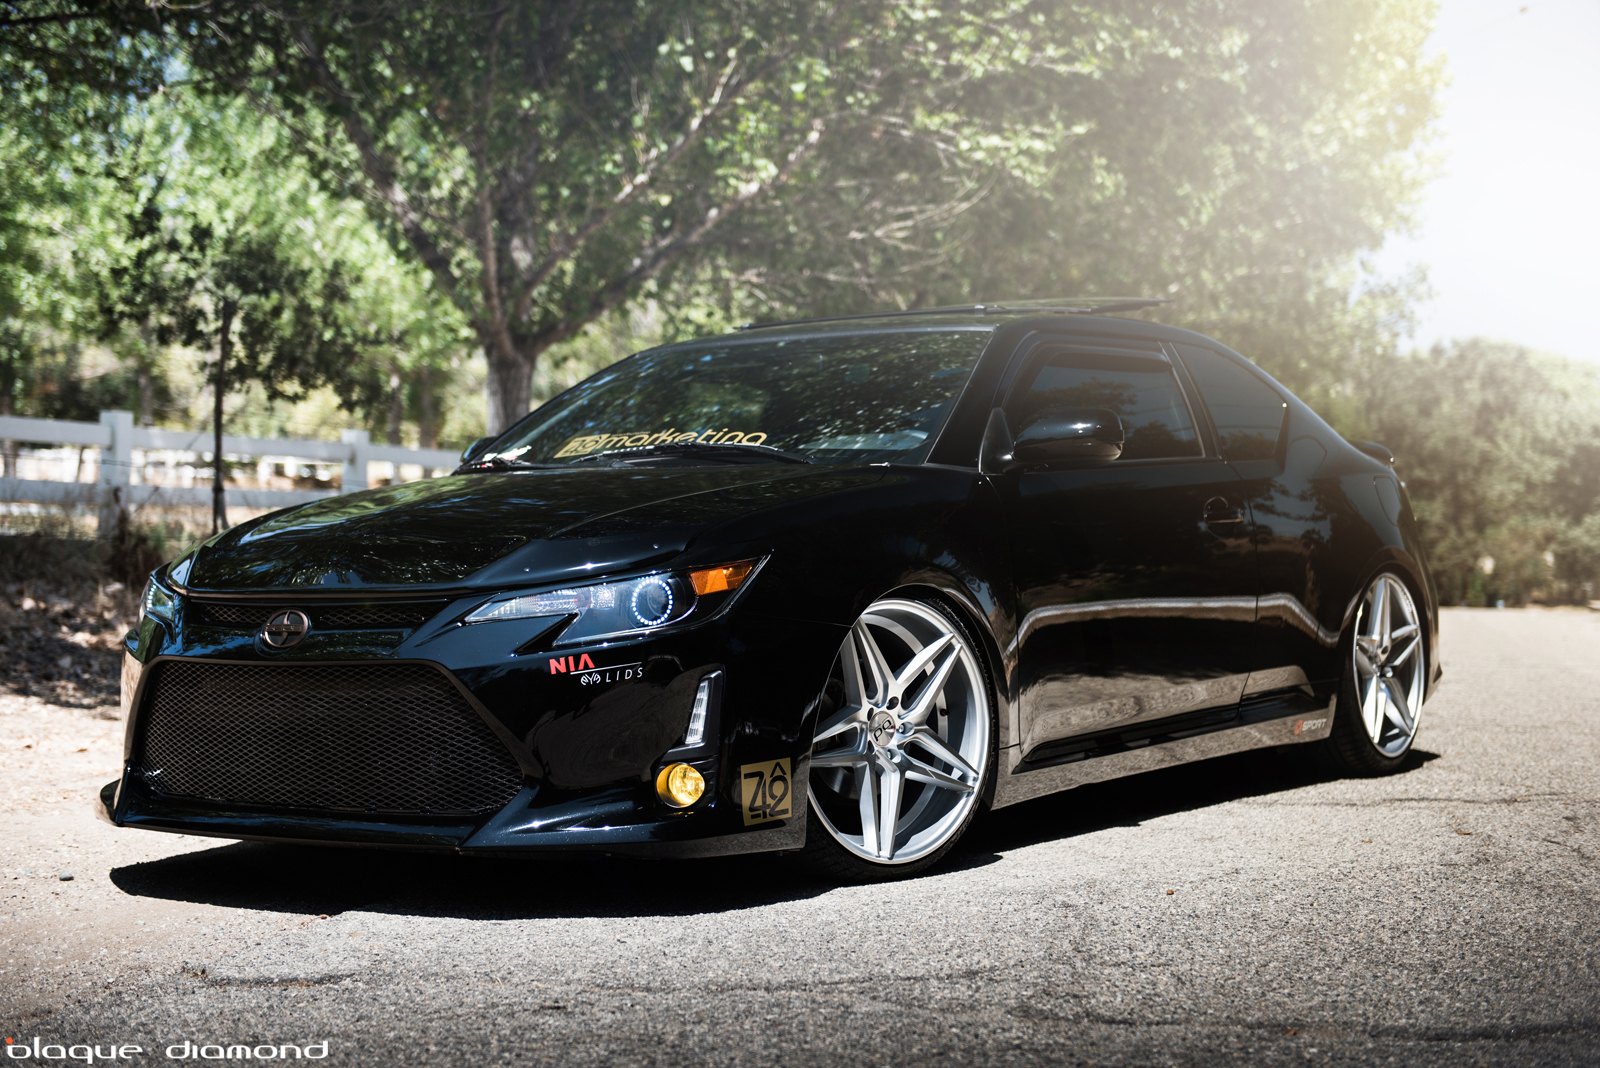 Front Bumper with Fog Lights on Black Scion tC - Photo by Blaque Diamond